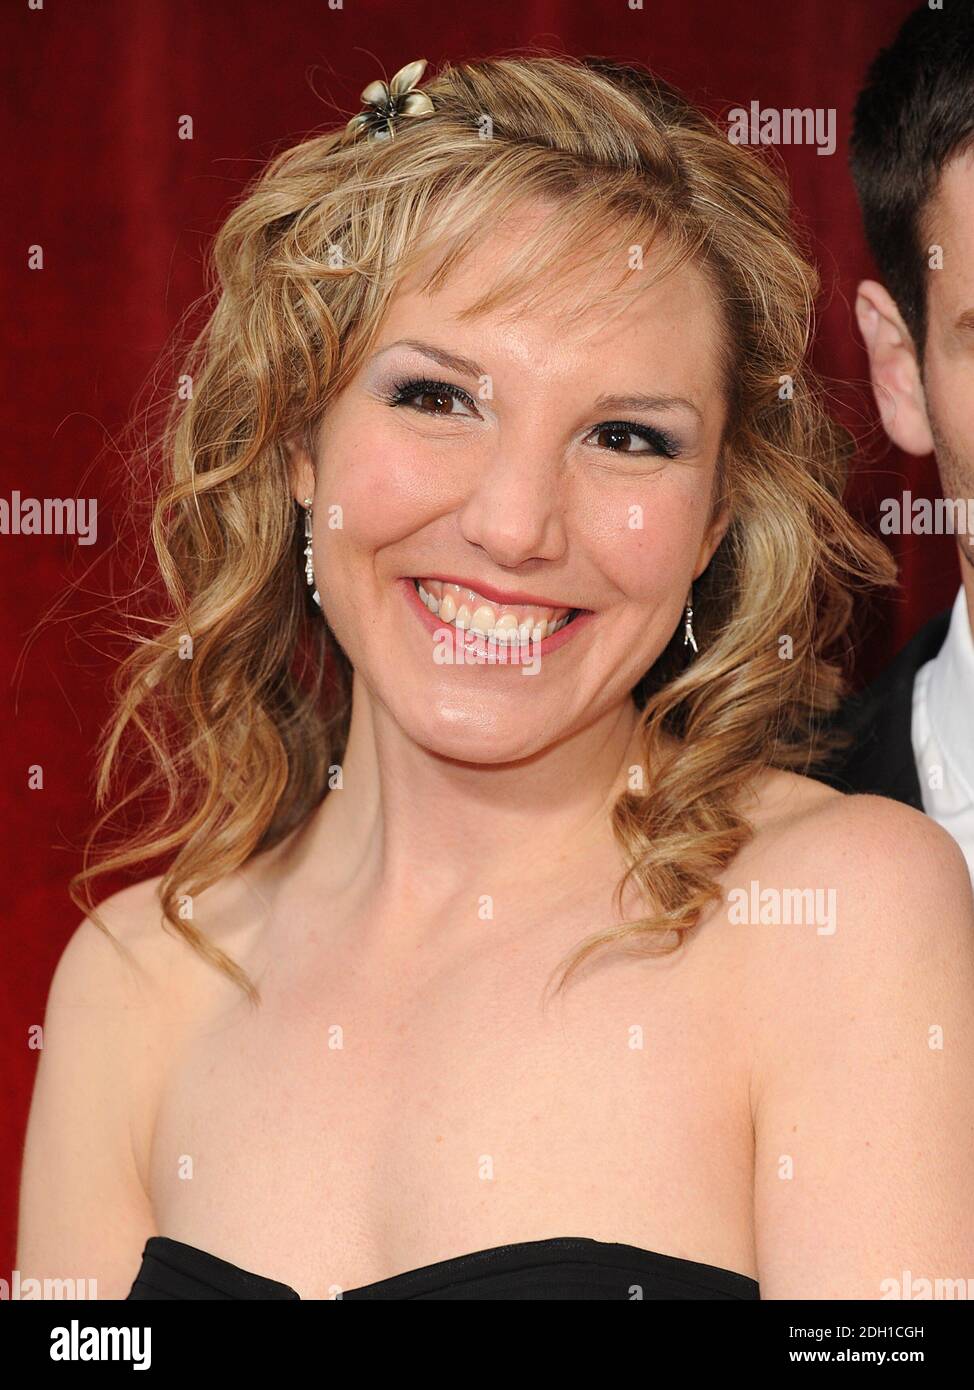 Elizabeth Bower arriving for the 2010 British Soap Awards at the